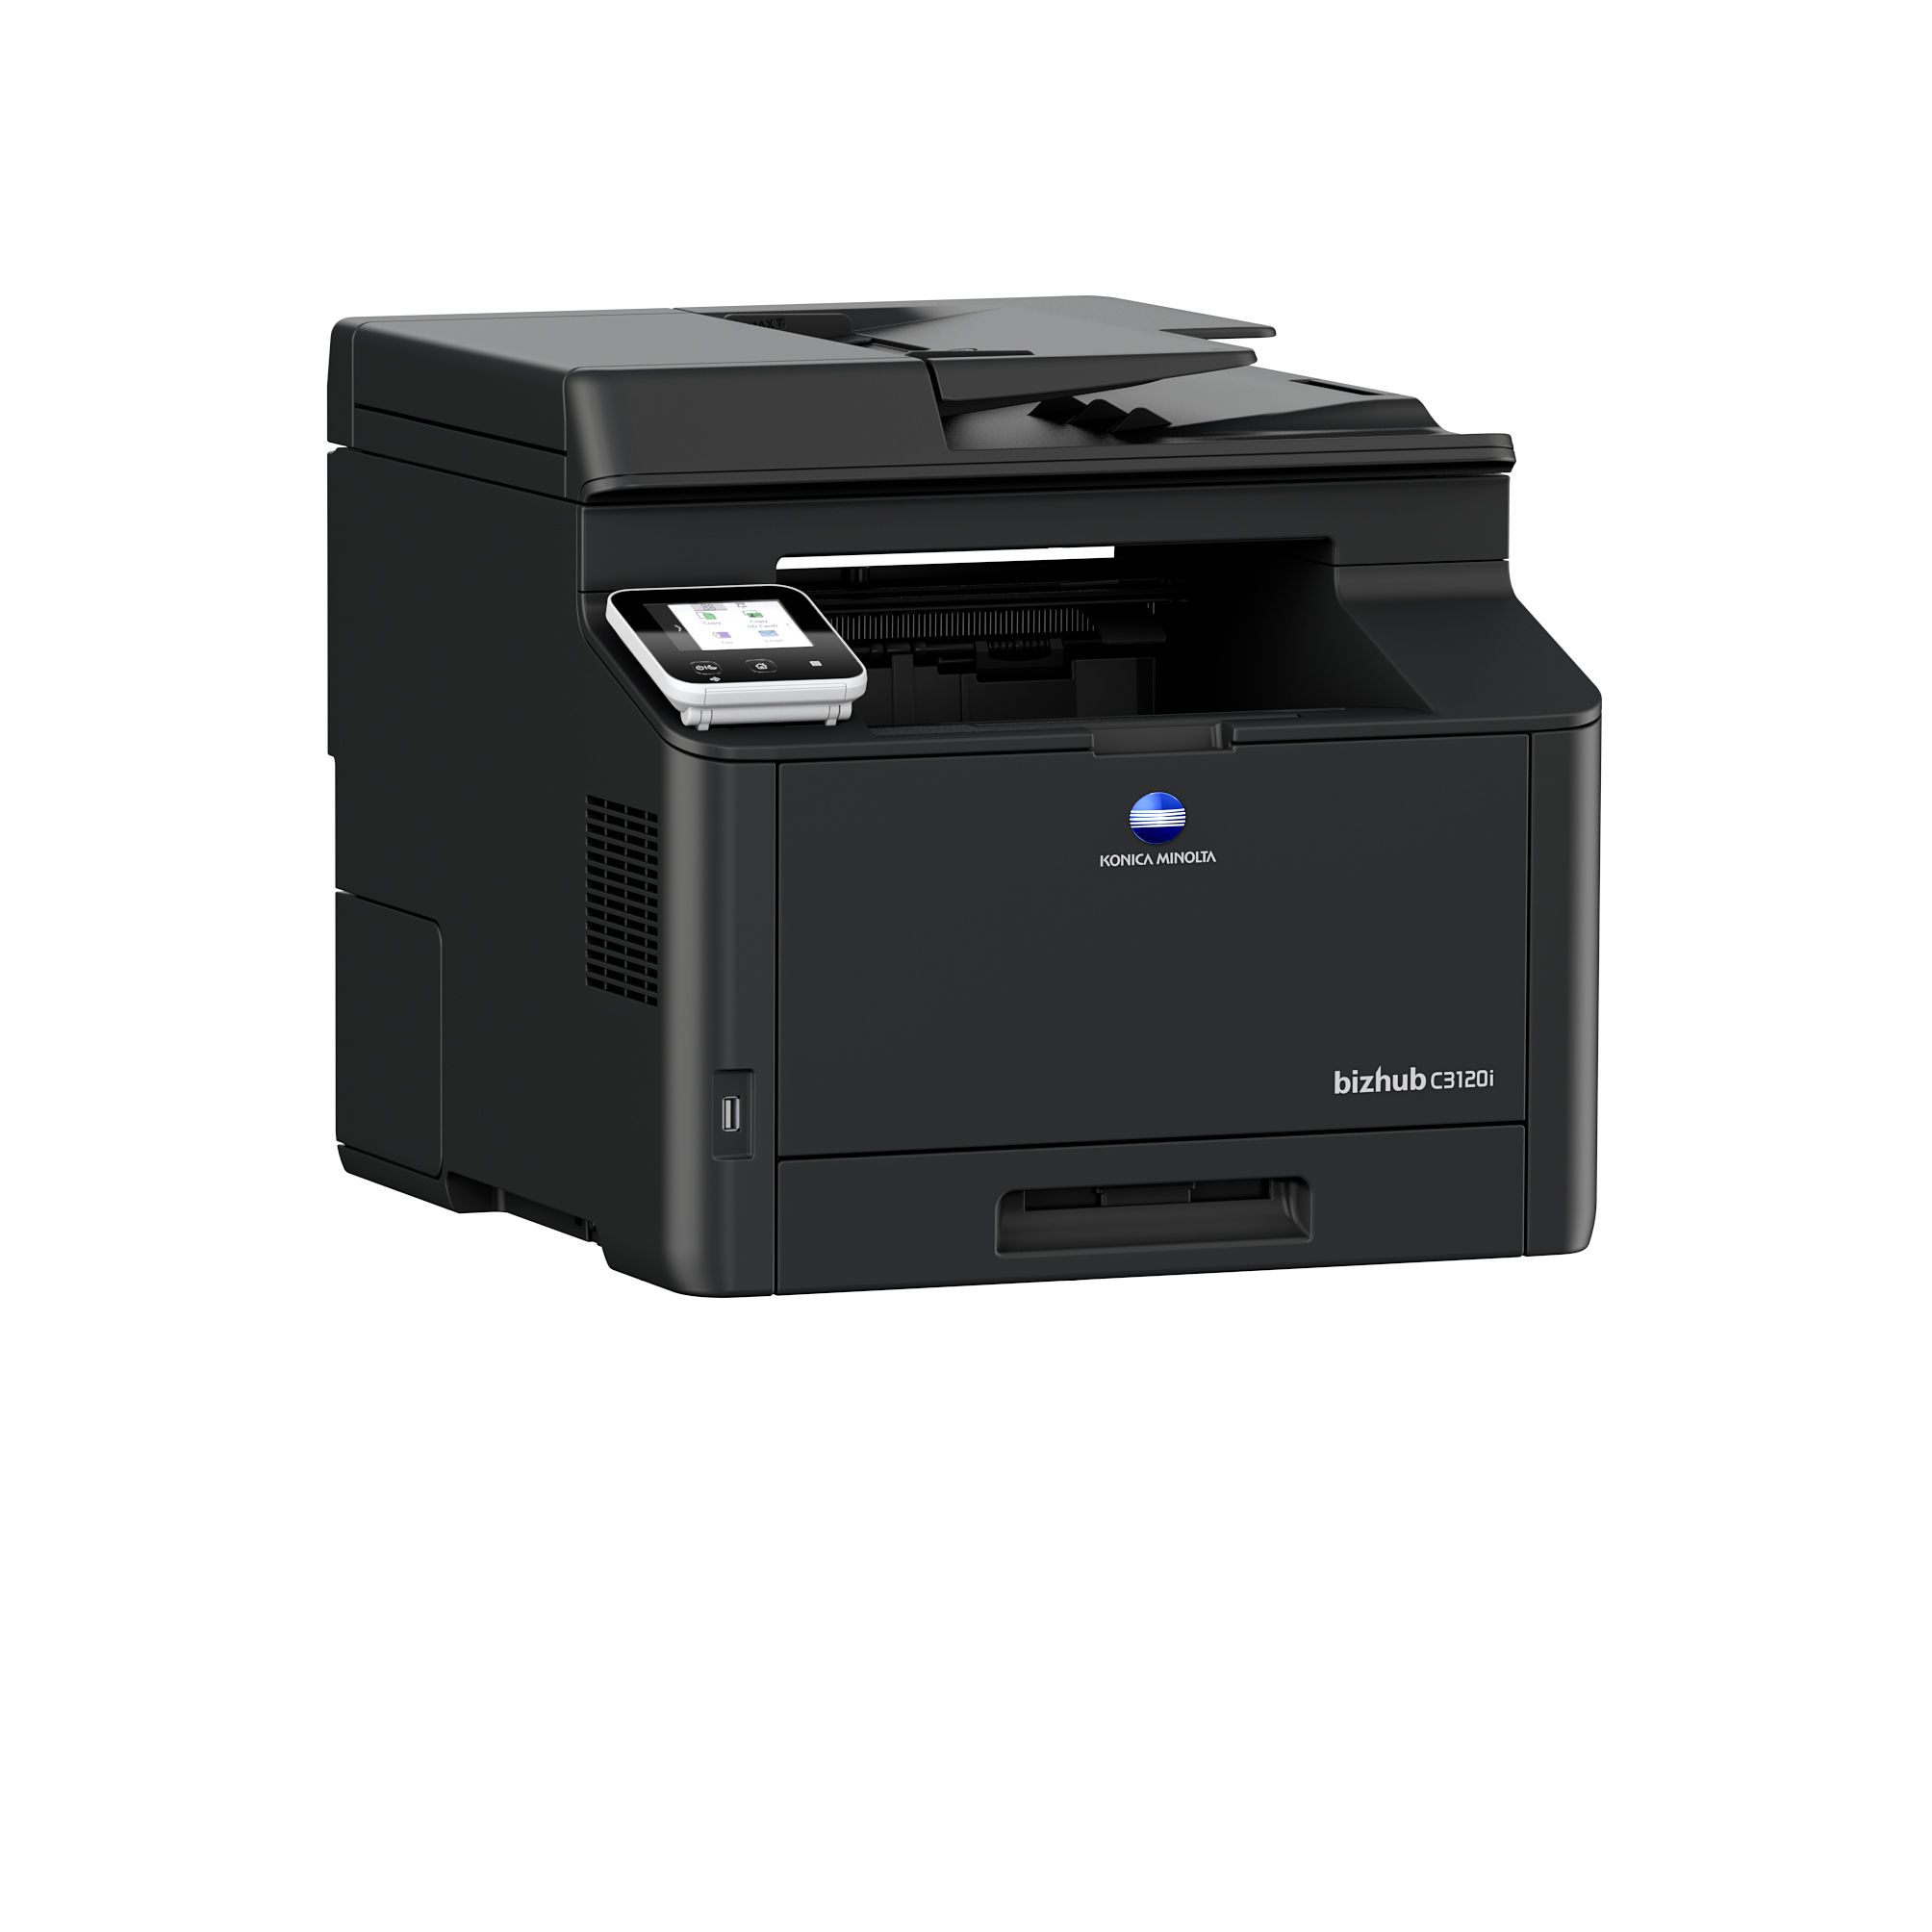 Konica Minolta Expands bizhub i-Series Line with New A4 Devices to Boost Productivity in the Home Office